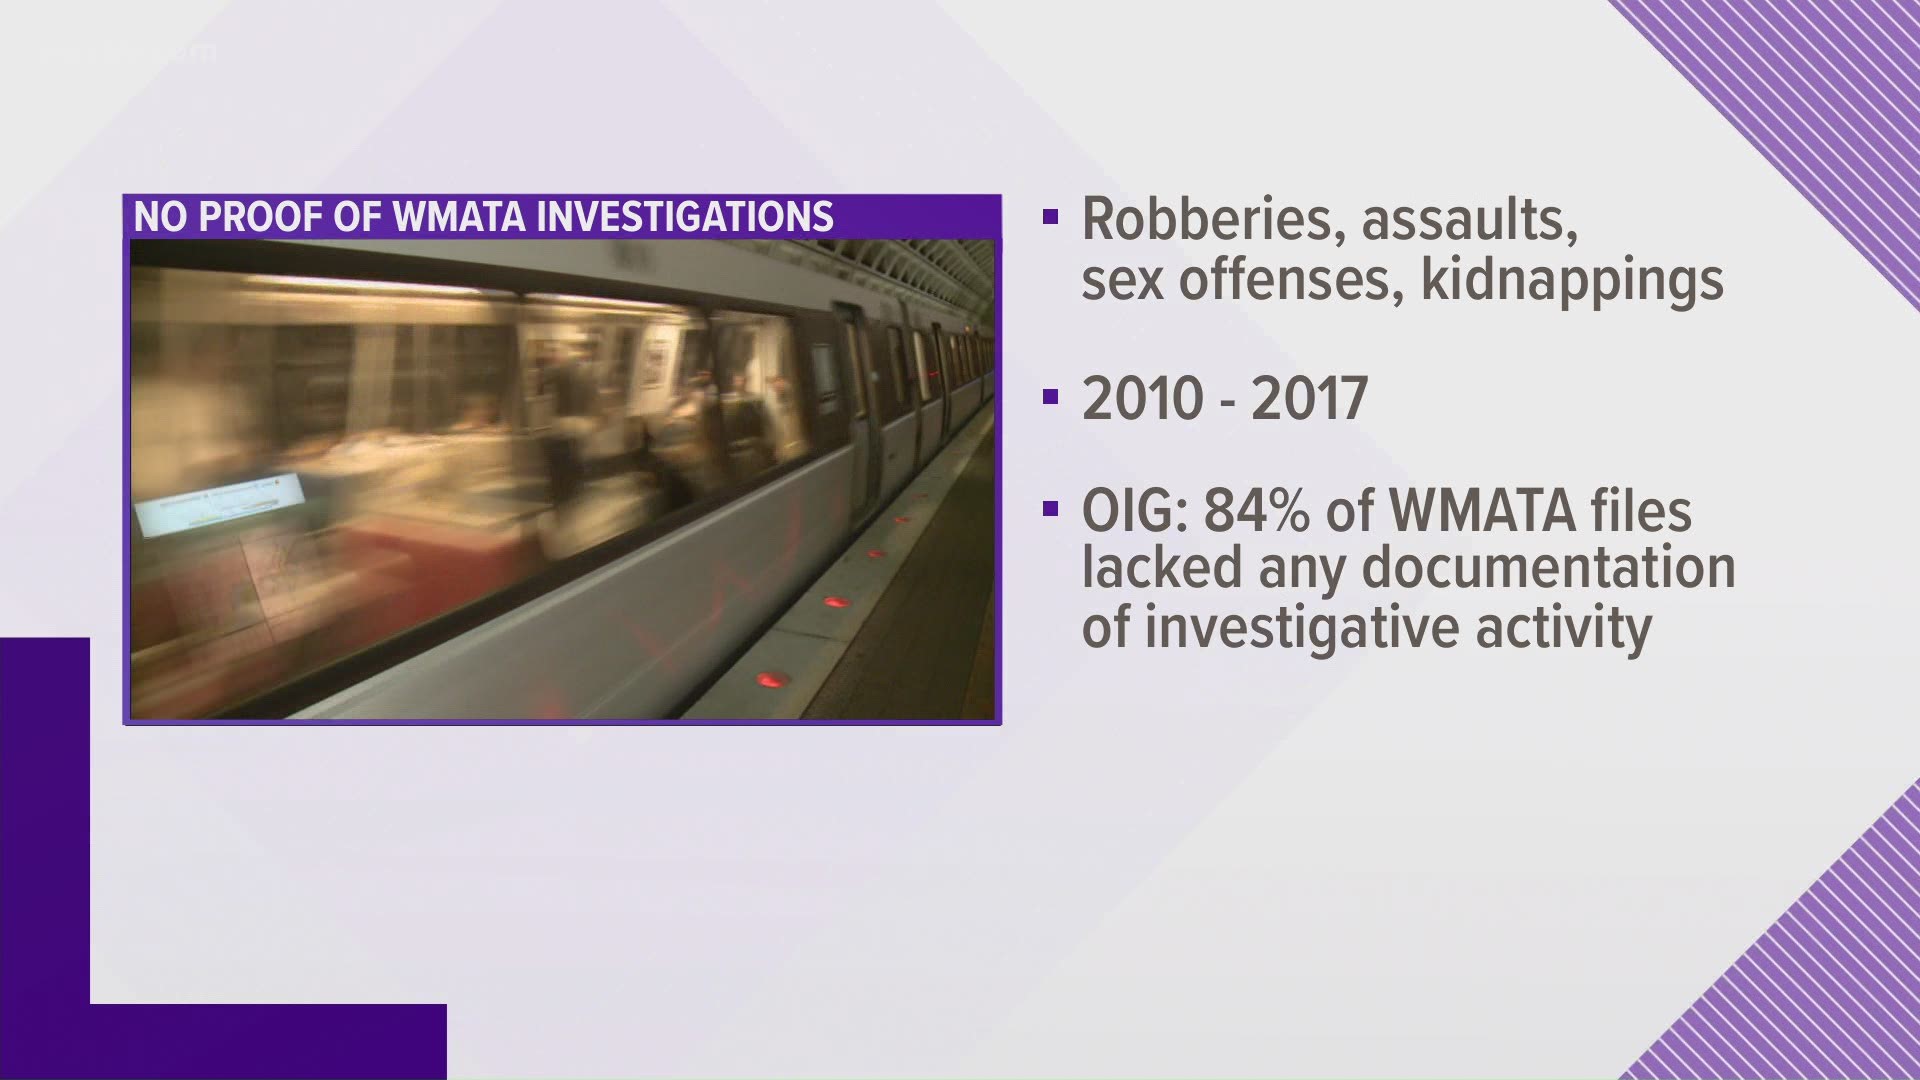 A new report from Metro's Office of the Inspector General shows major failings by WMATA Transit Police.